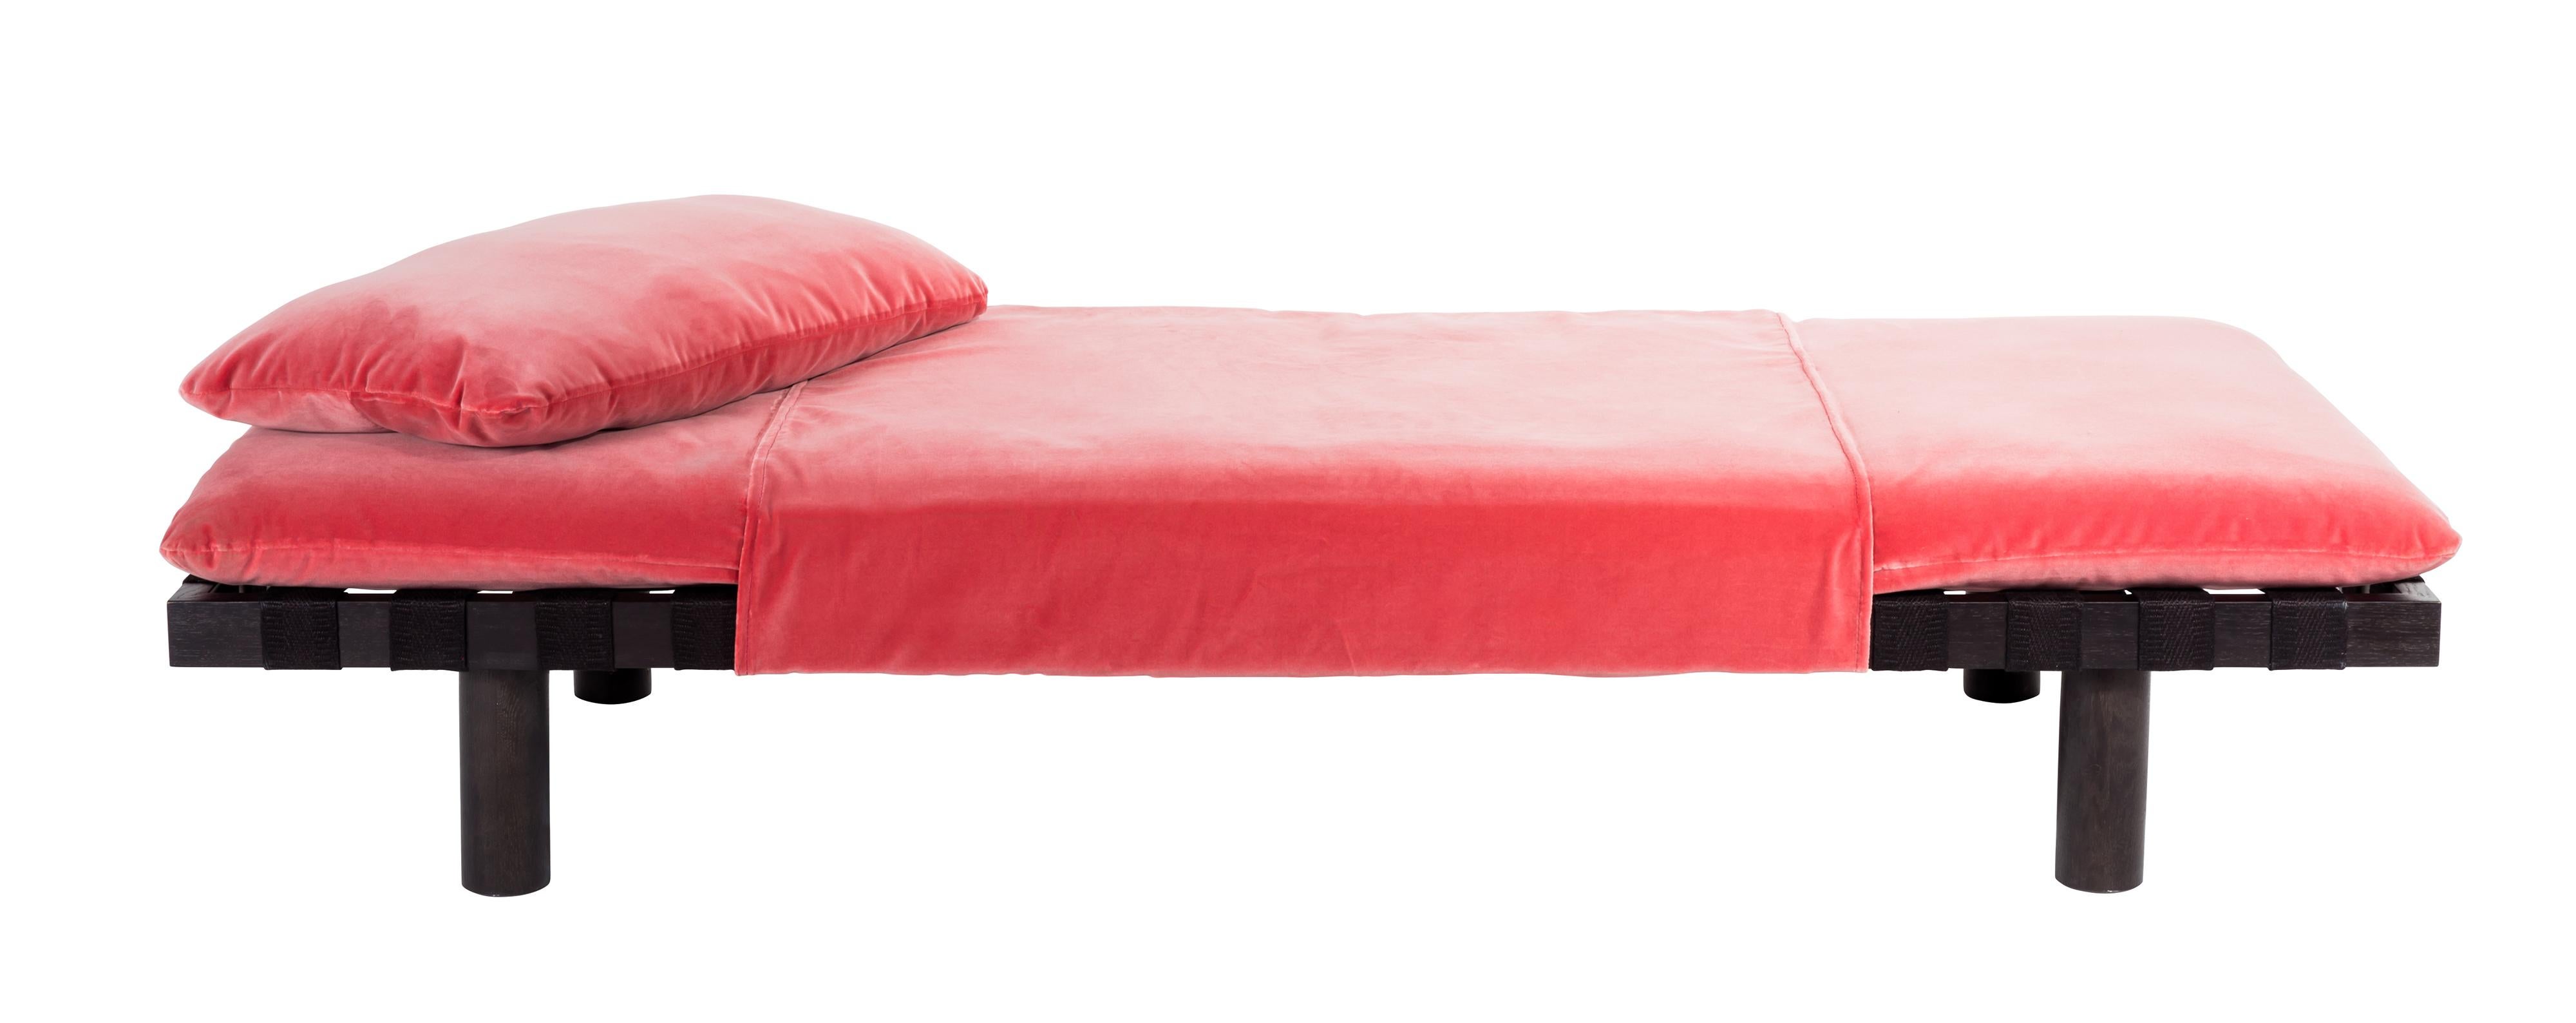 Pallet dirty pink velvet black daybed by Pulpo
Dimensions: D200 x W80 x H29 cm
Materials: Fabric/leather, foam and wood.

Also available in different colours and finishes. 

Thinking about the first significant furniture for pulpo with the